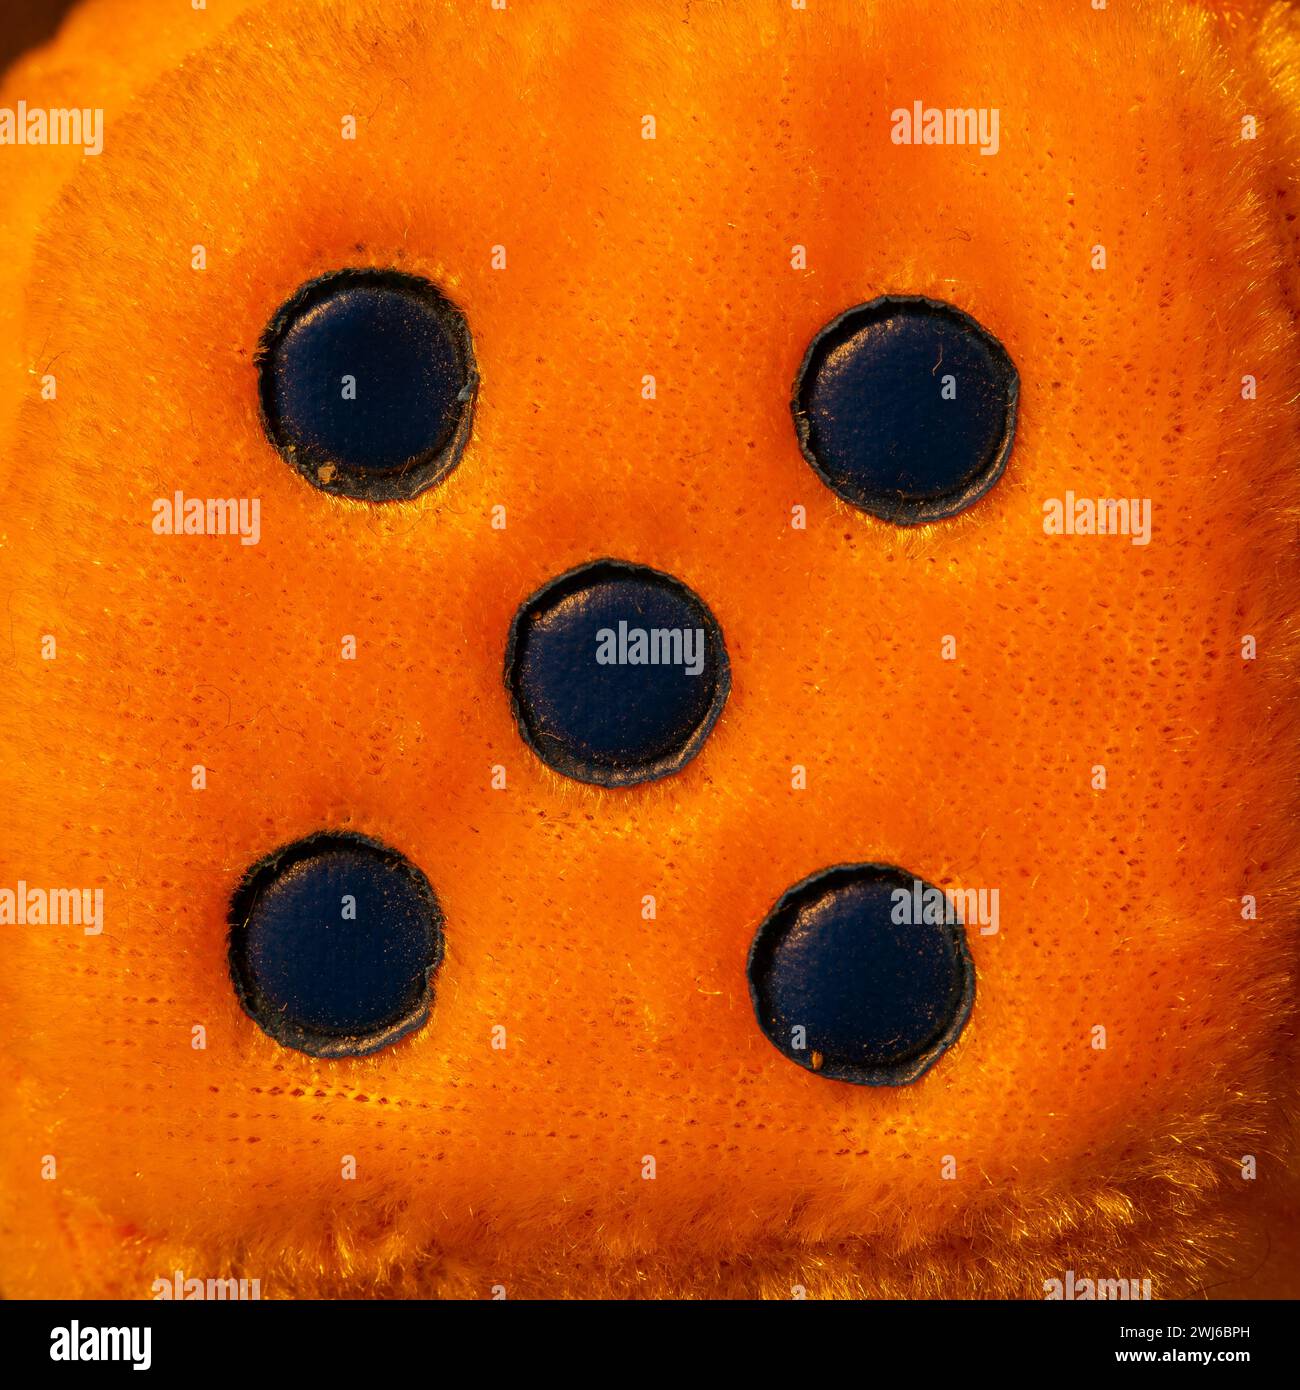 Top view of one side of orange fluffy dice. Close up as a background. Stock Photo